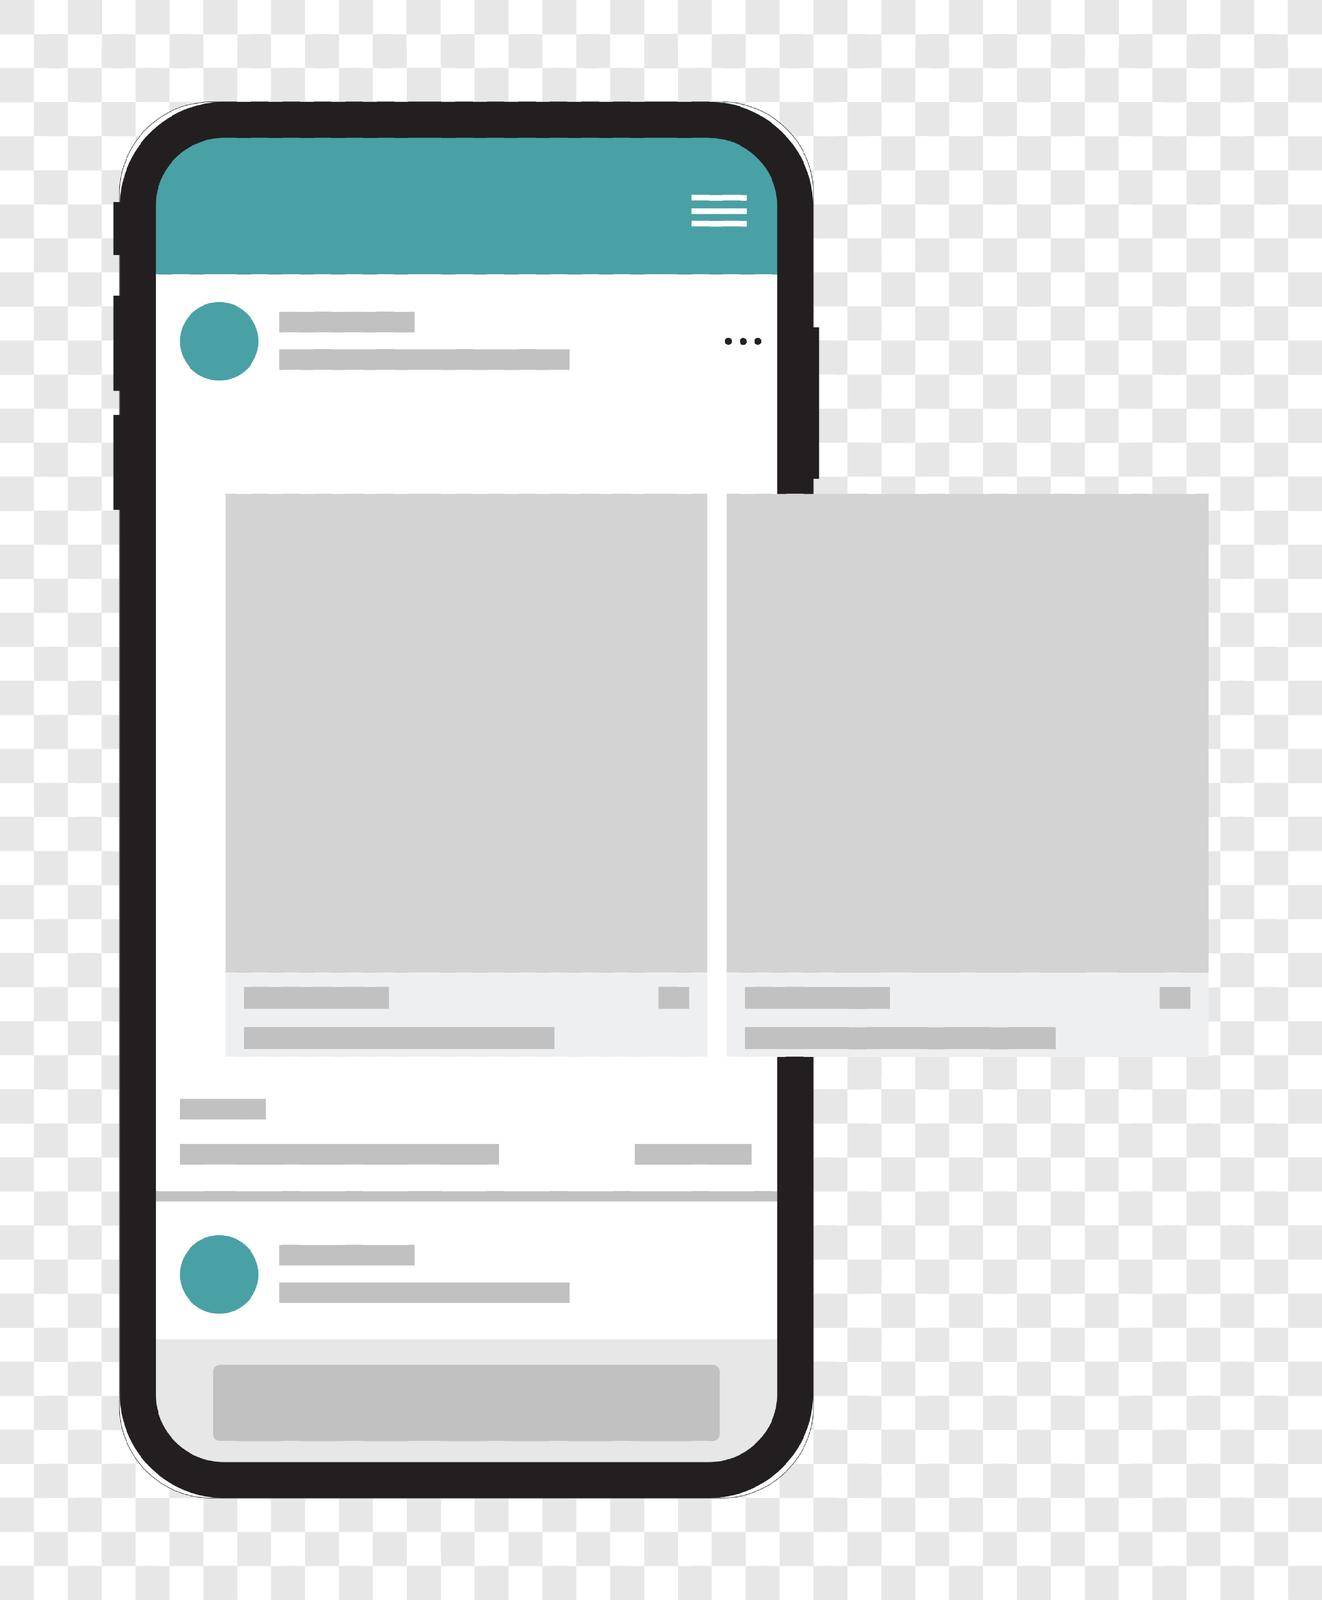 Social media mobile app page template. Carousel post. Layout to demonstrate the design of the tape profile of the mobile application. Minimal design. Easily Editable Vector. EPS 10.